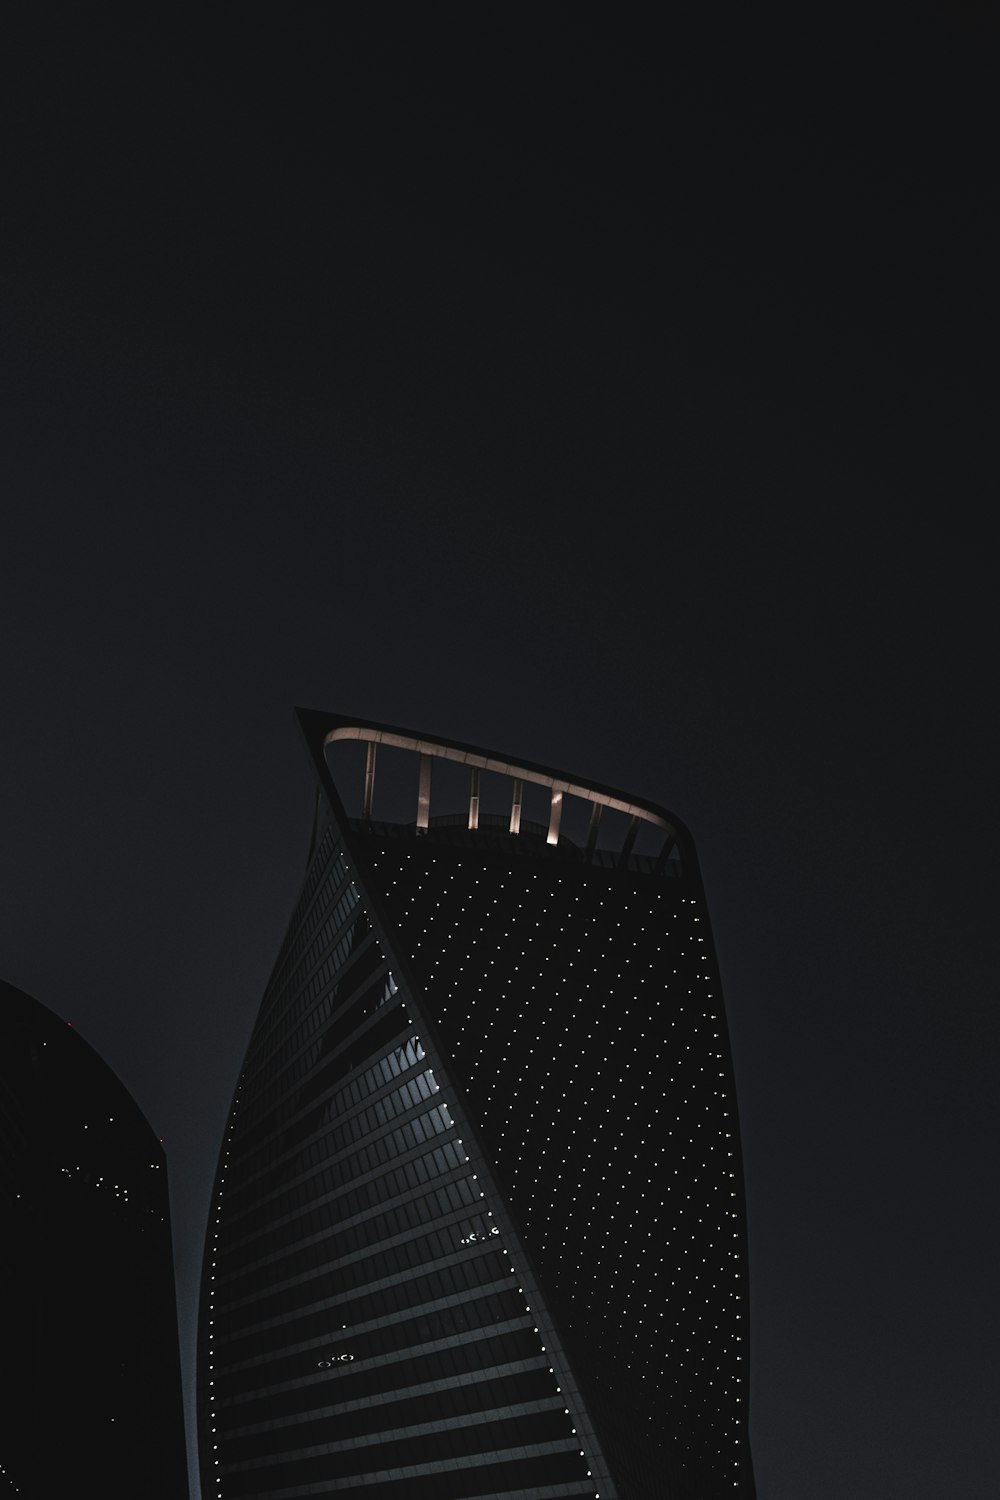 black high rise building during night time